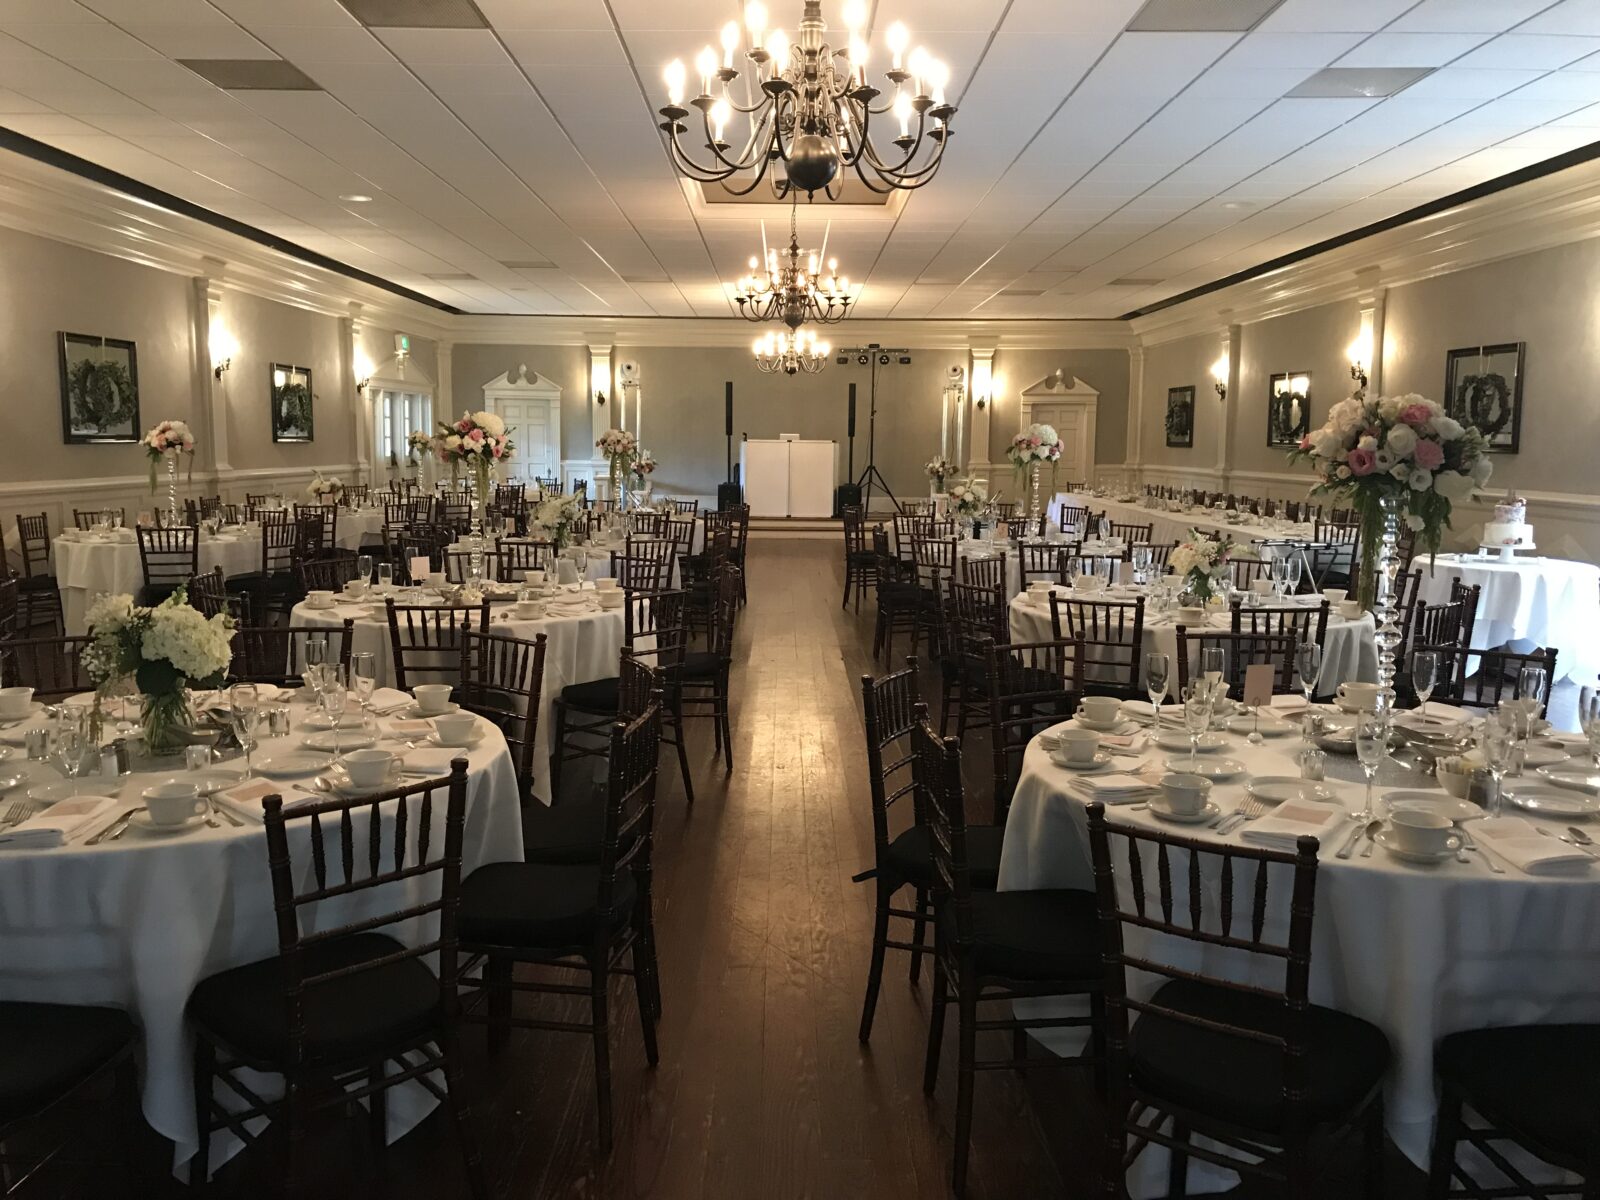 Decorated tables line the Heritage Room for a wedding reception